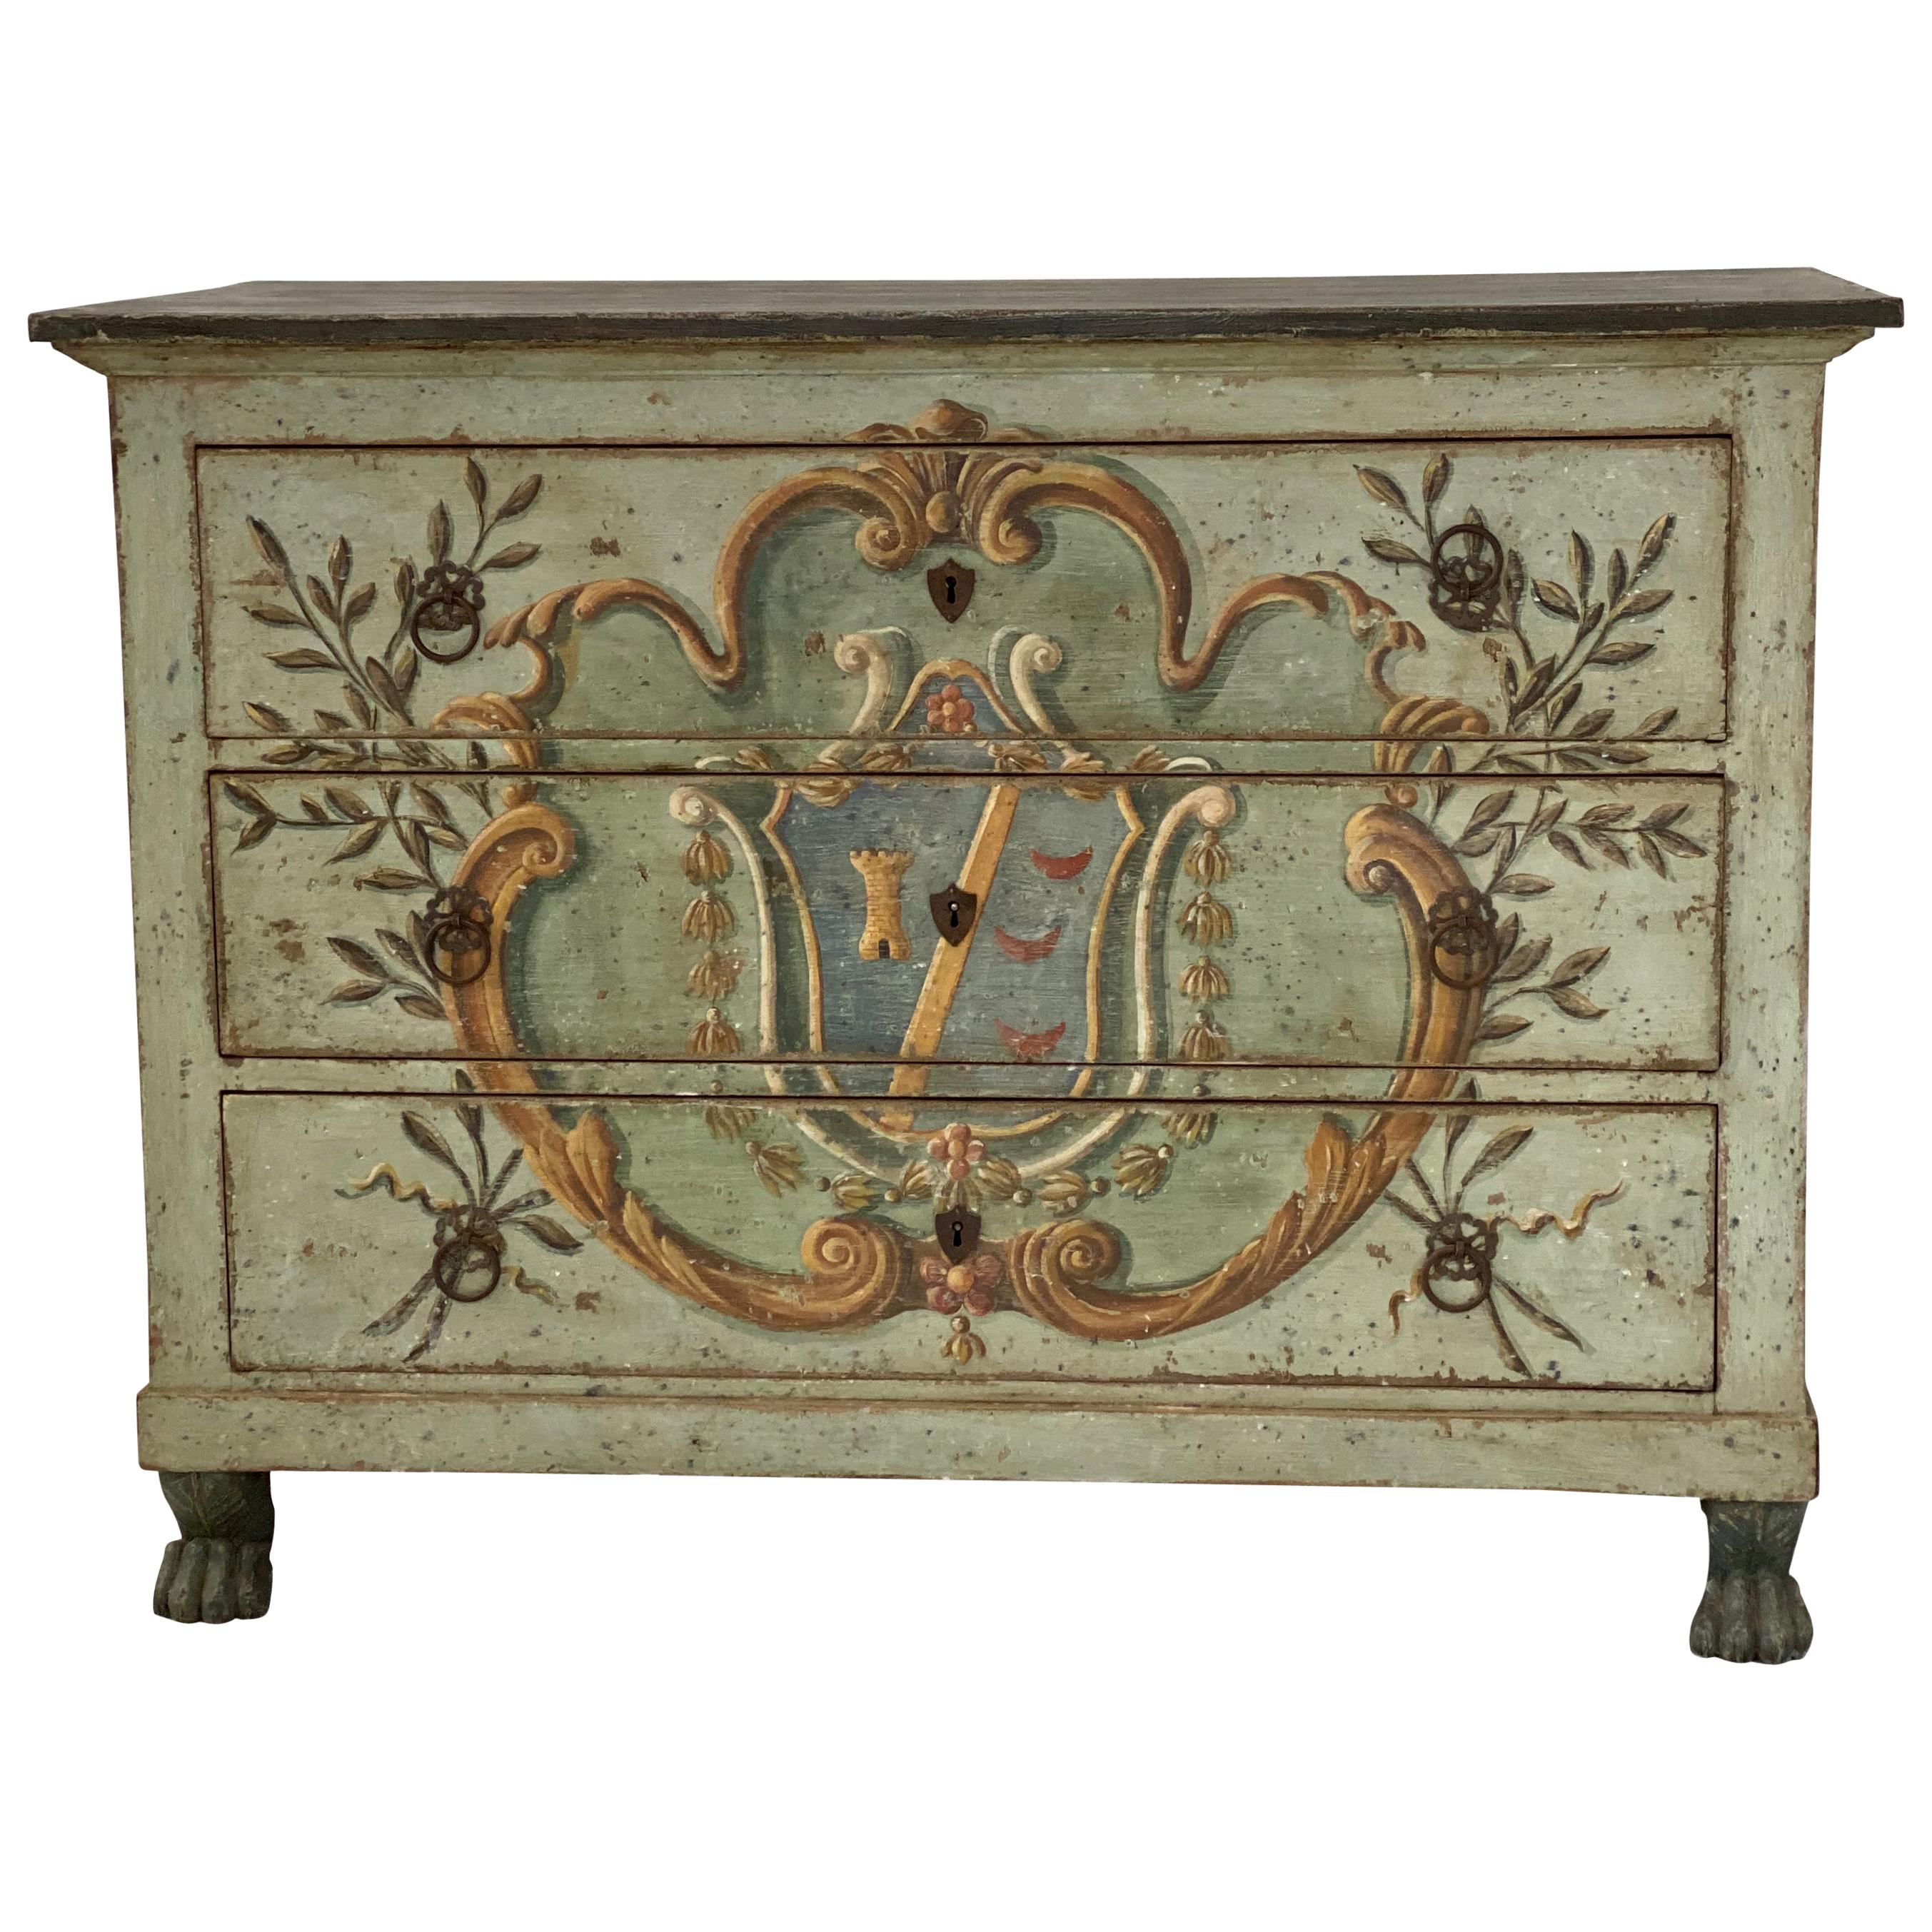 Early 19th Century French Neoclassical Painted Chest